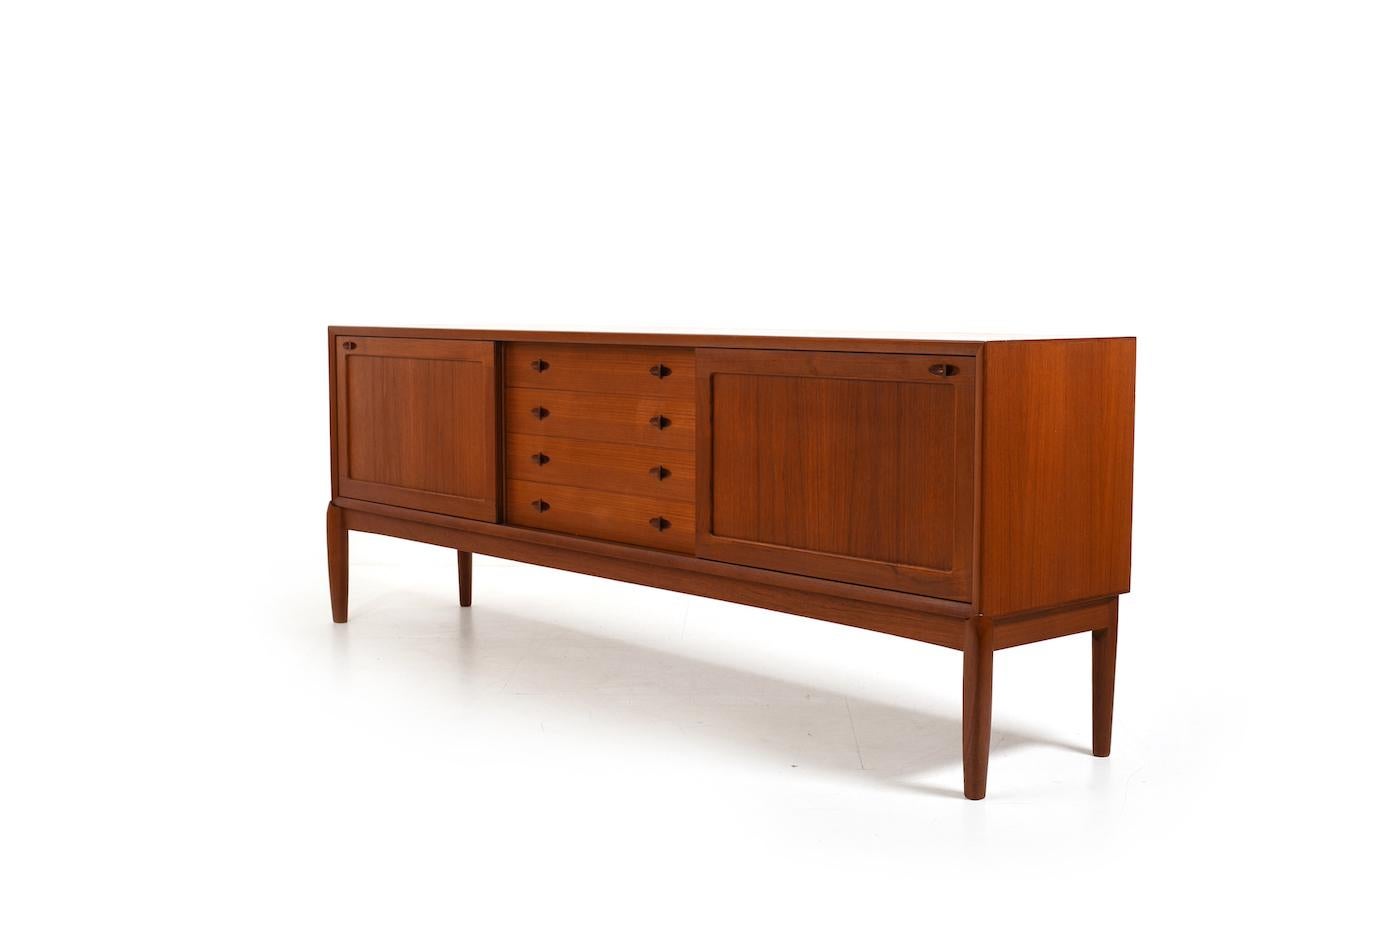  Henry W. Klein teak sideboard. Front with 4 drawers and 2 sliding doors. Behind sliding doors with shelves. Produced by Bramin Denmark 1960s. Beautiful teak color.